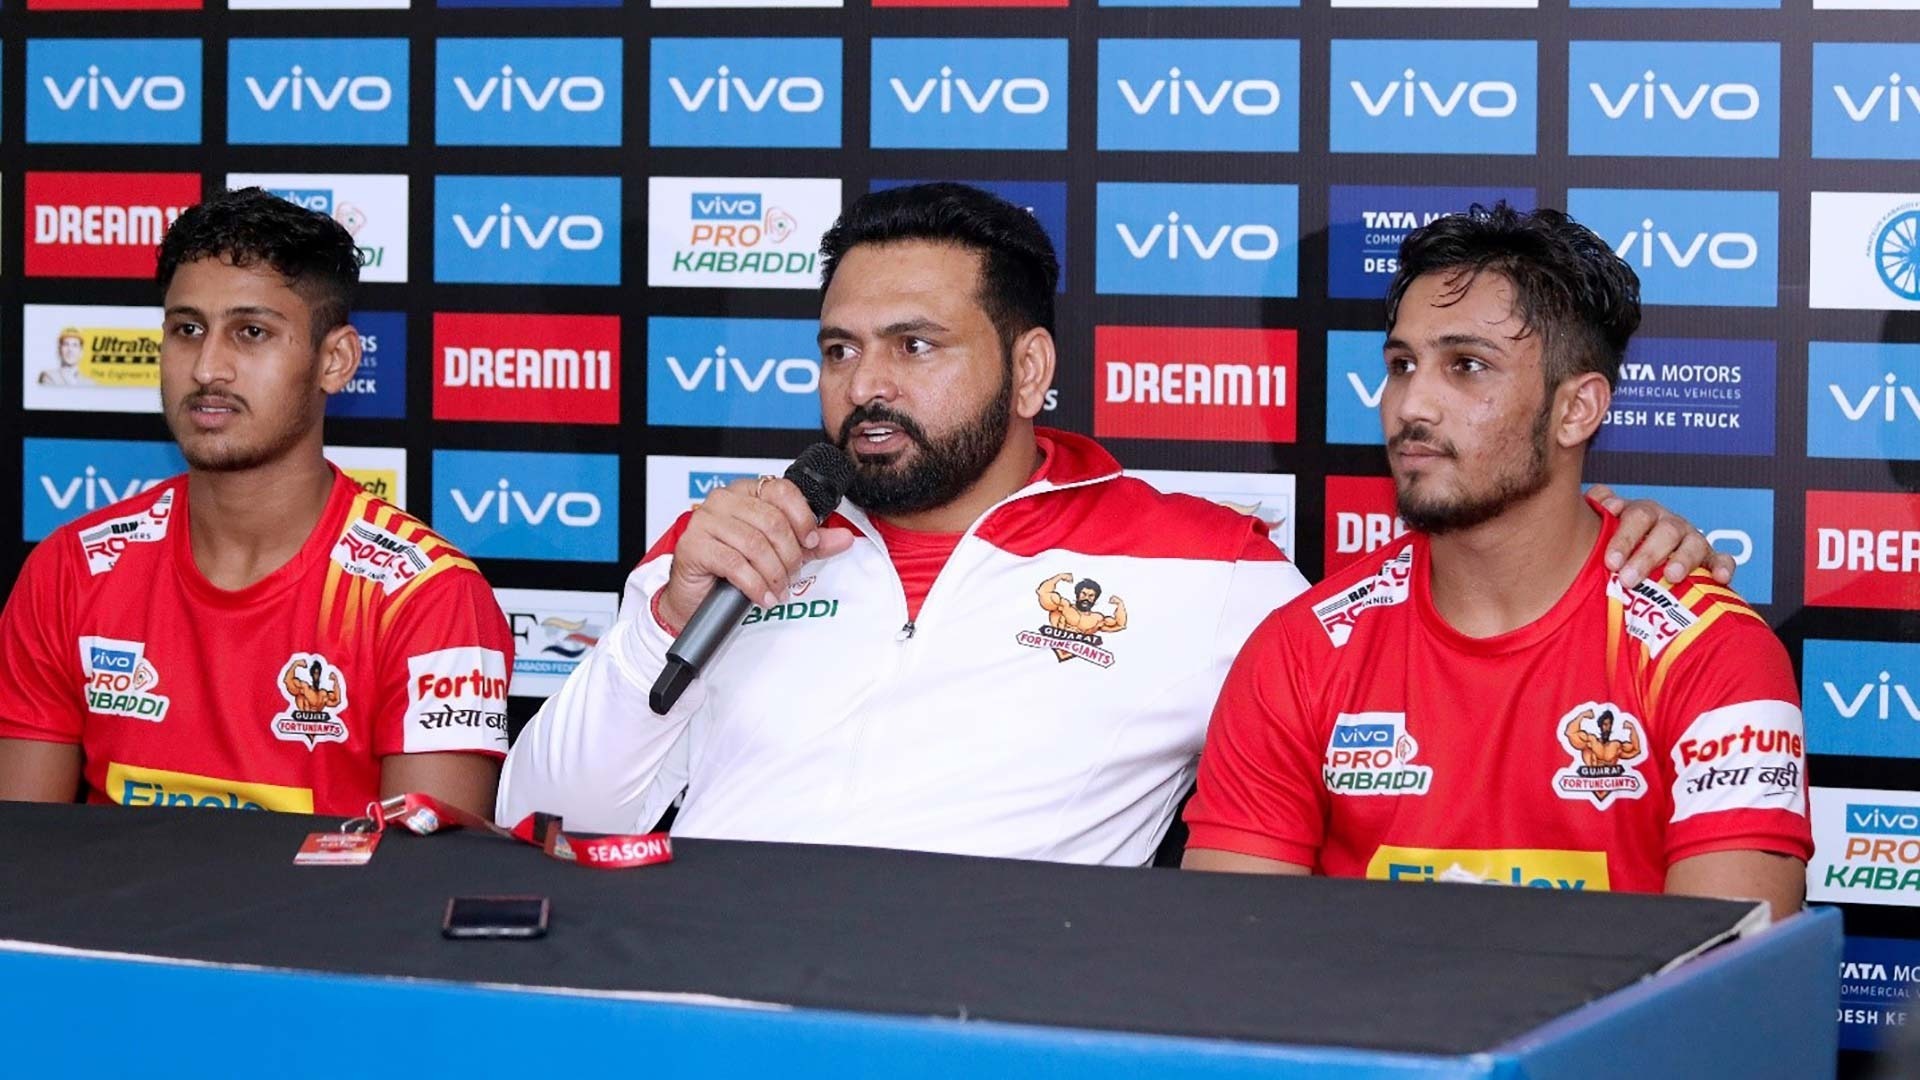 PKL 2019 | Little more patience on last raid would have given us the win, says Manpreet Singh